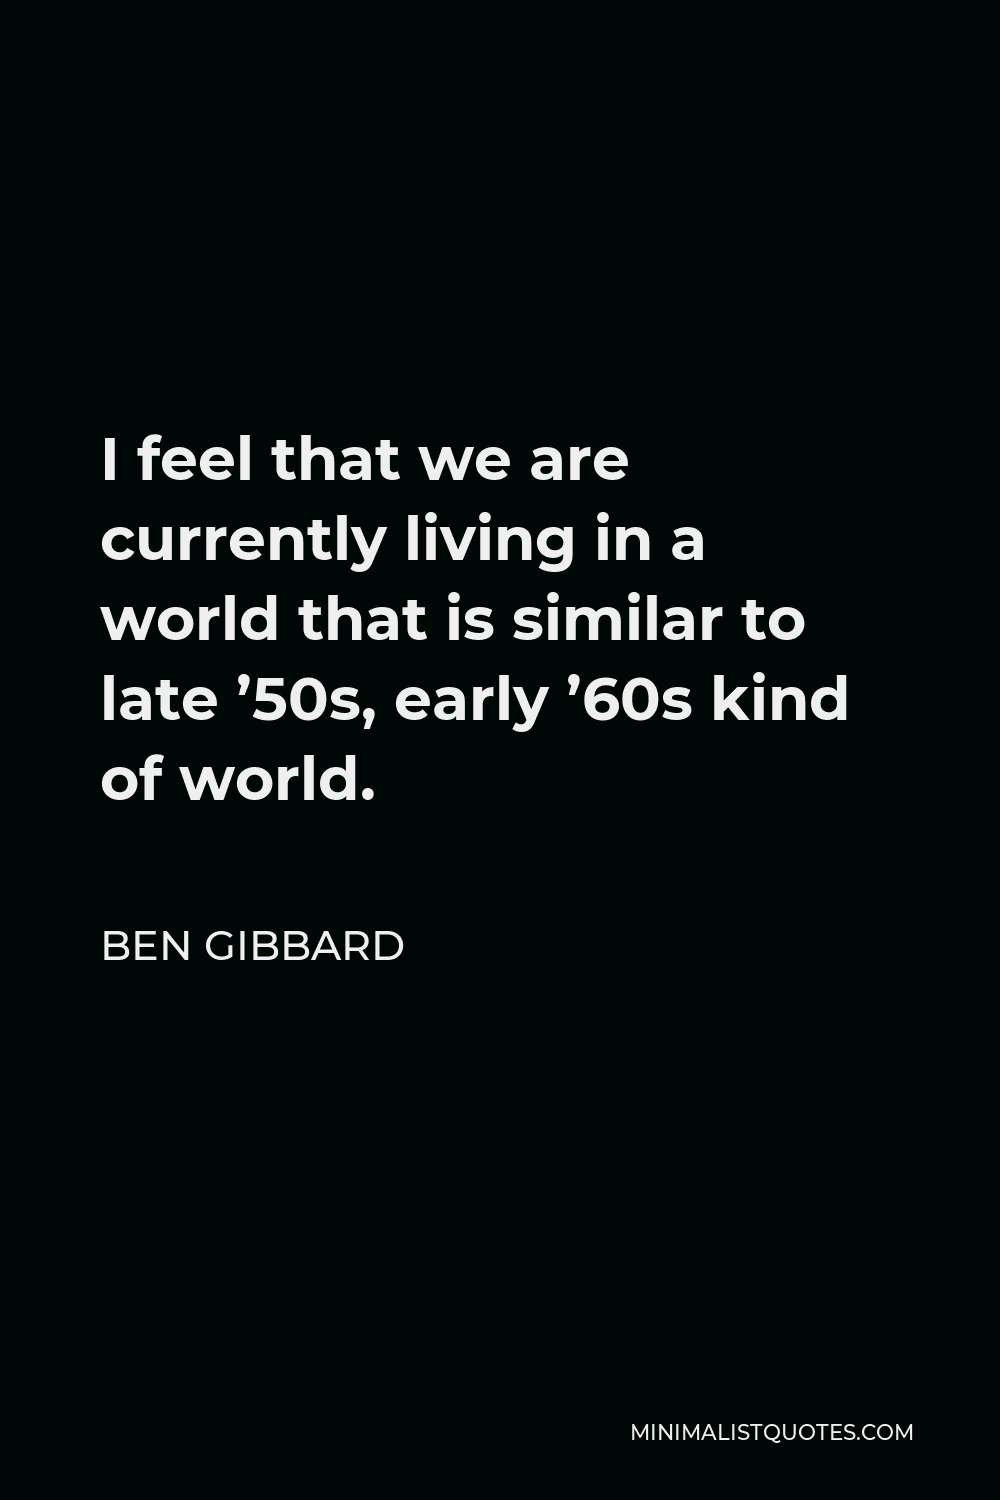 Ben Gibbard Quote - I feel that we are currently living in a world that is similar to late ’50s, early ’60s kind of world.